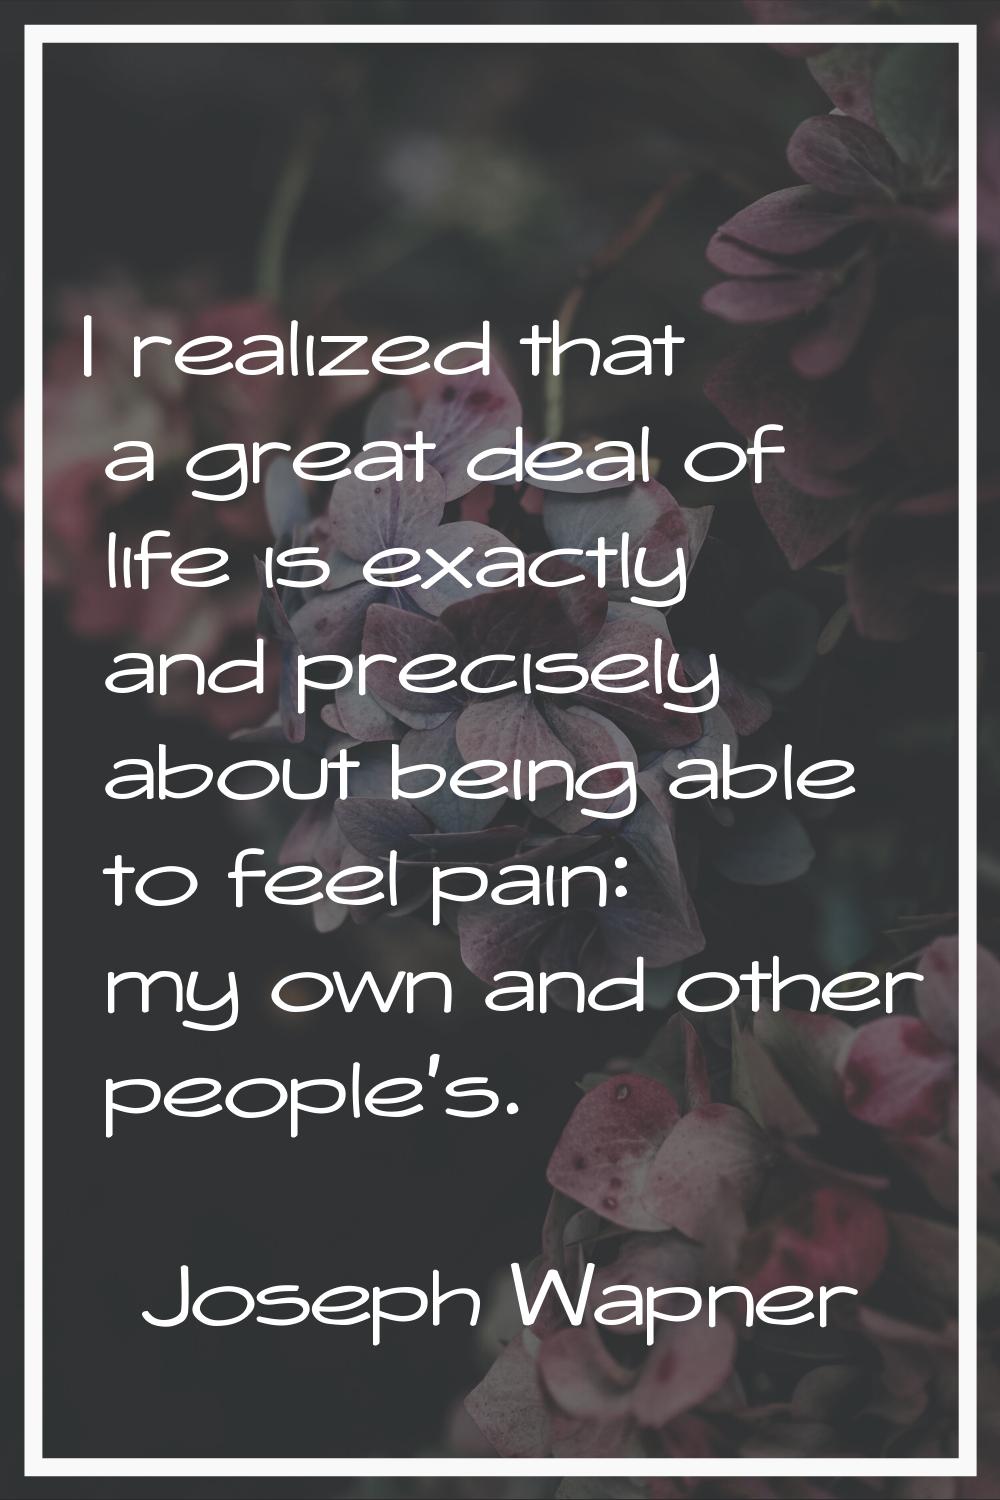 I realized that a great deal of life is exactly and precisely about being able to feel pain: my own